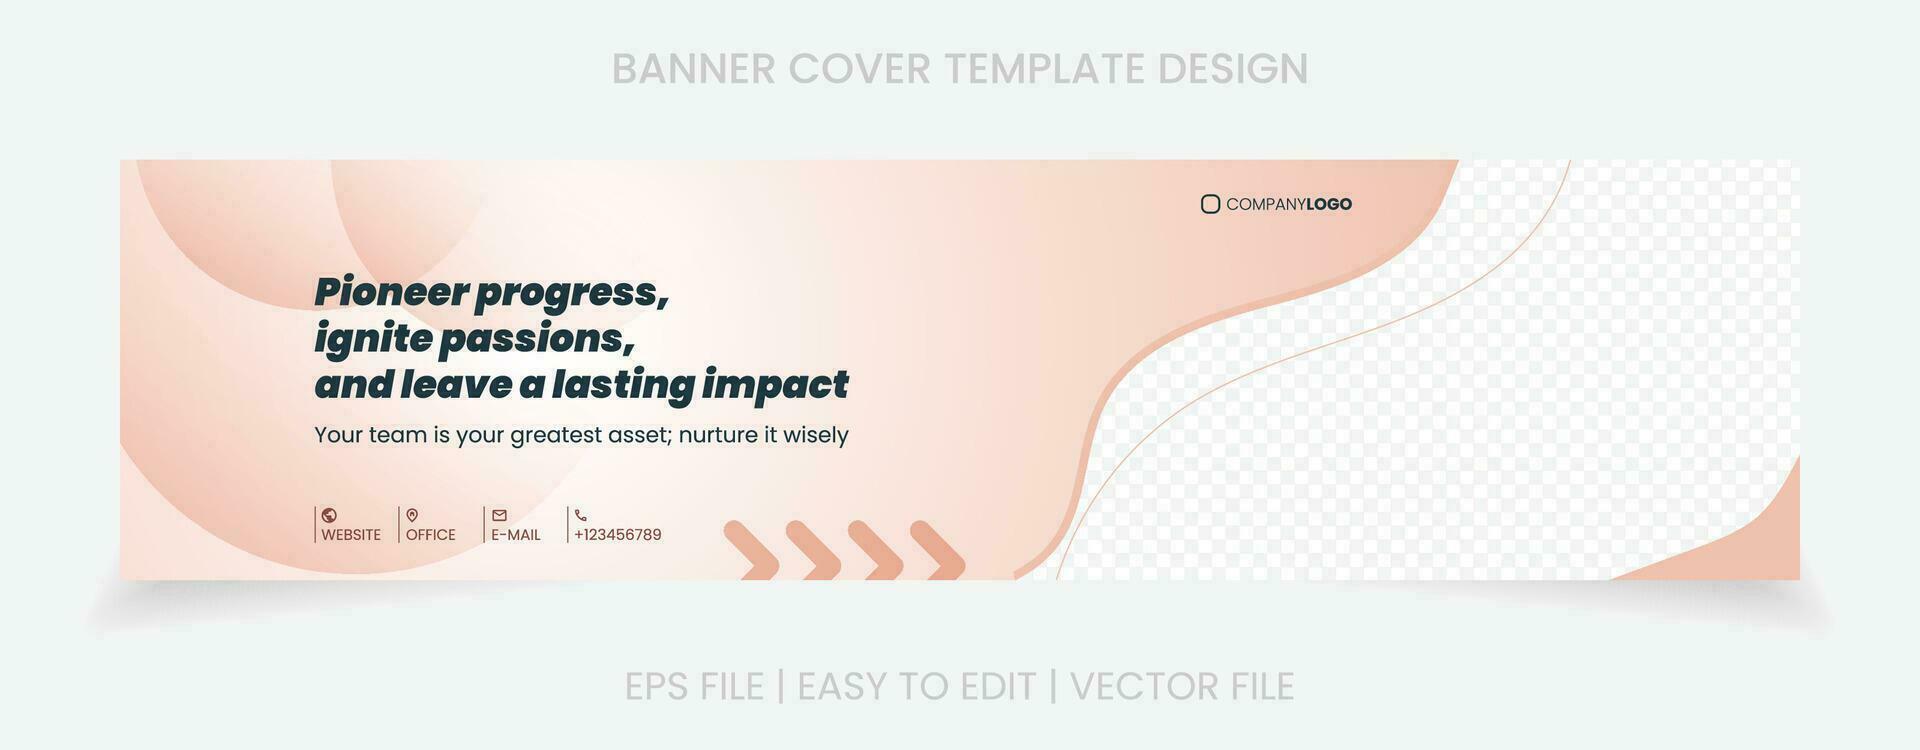 business banner company cover social media template design vector